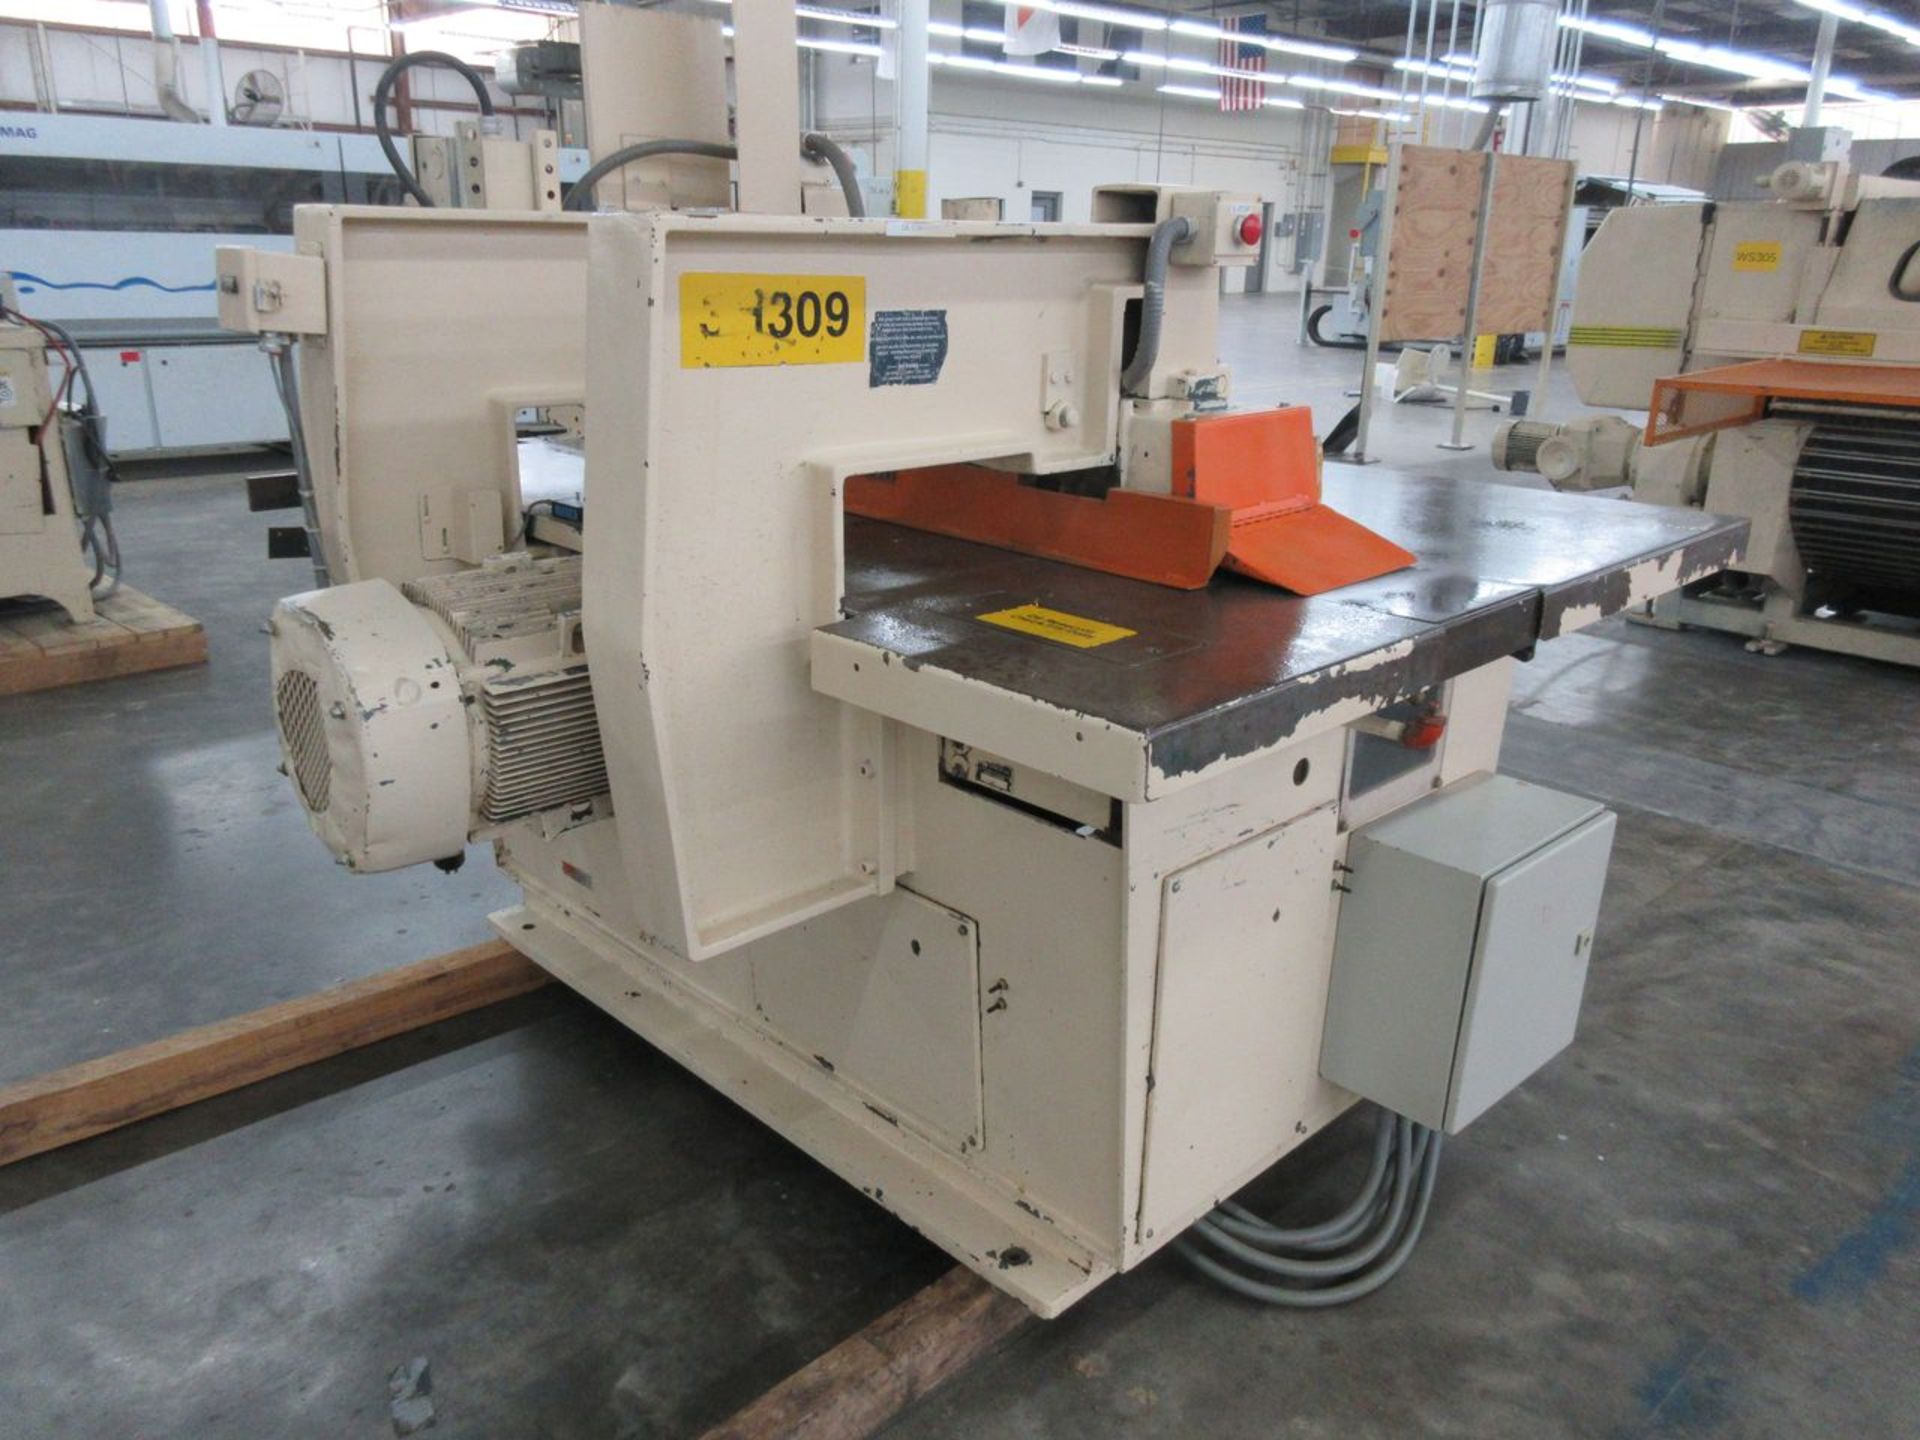 Diehl Model SL-52 Straight Line Chain-Fed Rip Saw, S/N: 10/85M4860-4276; with 25 in. Throat, 15-HP - Image 7 of 7